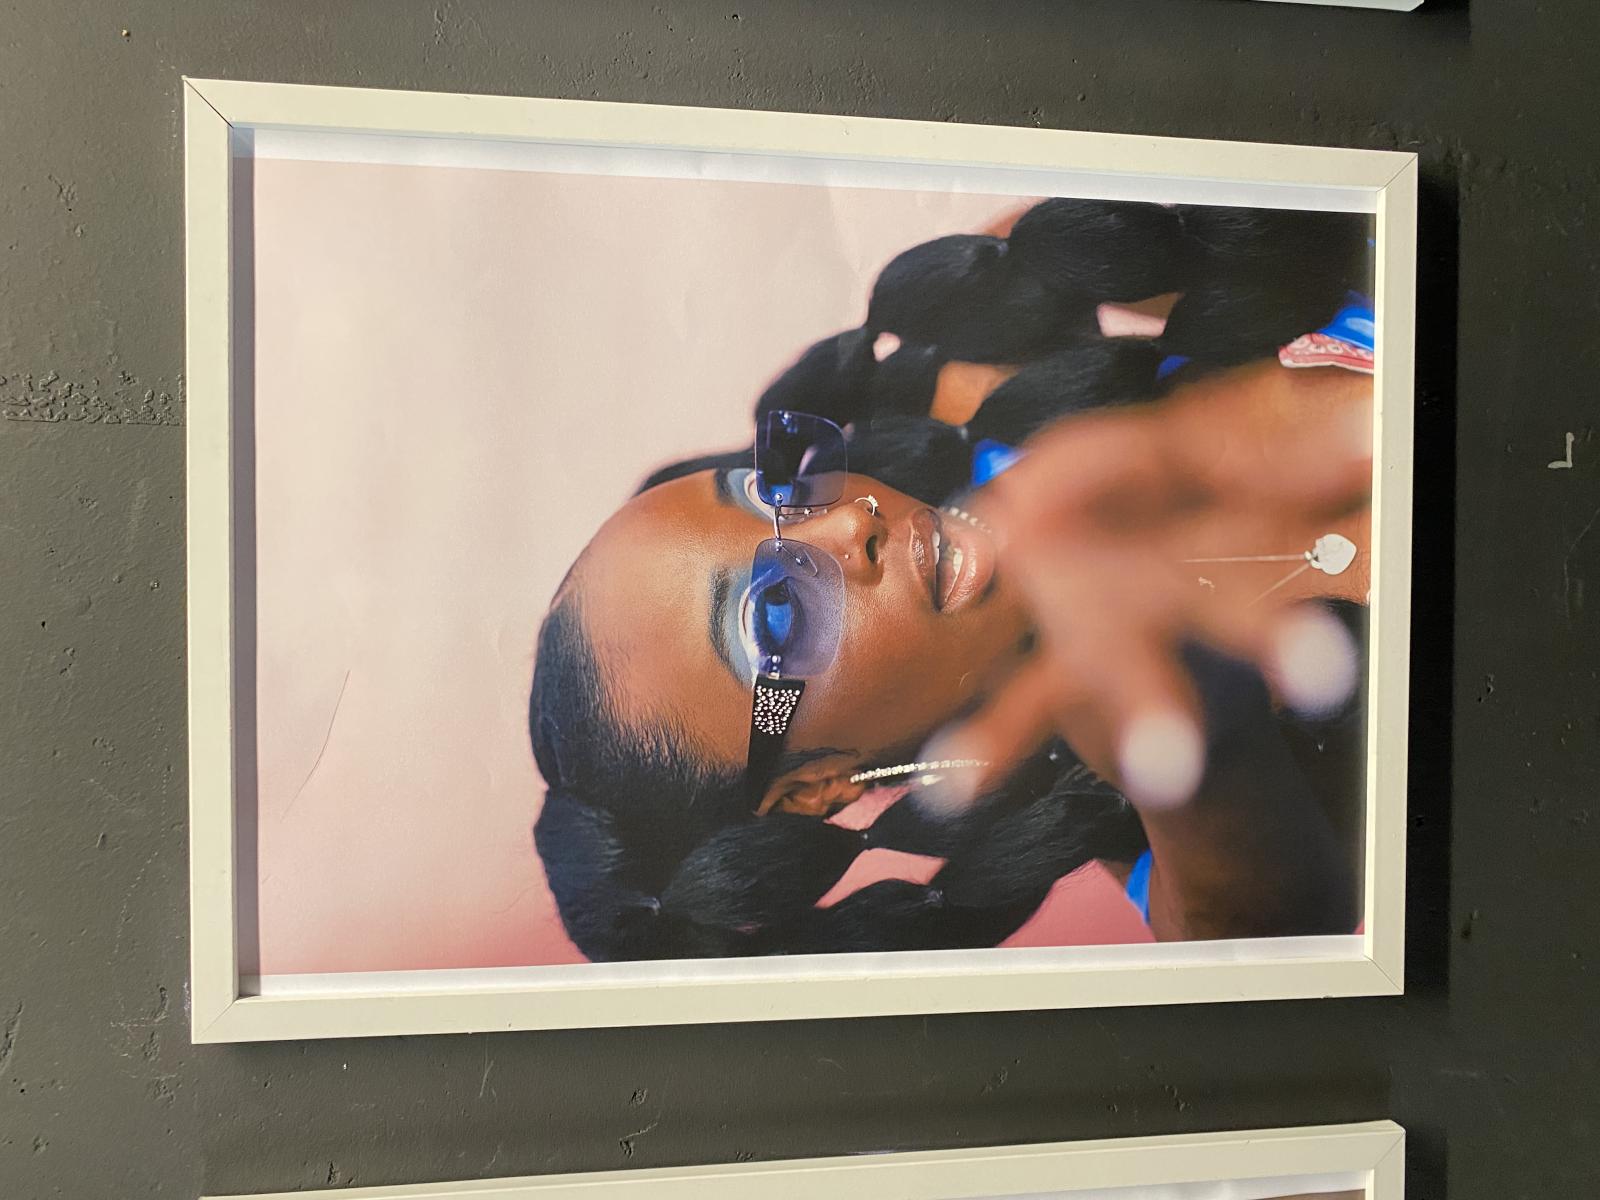 Silver Spoon is being exhibited at the Black Joy exhibition!